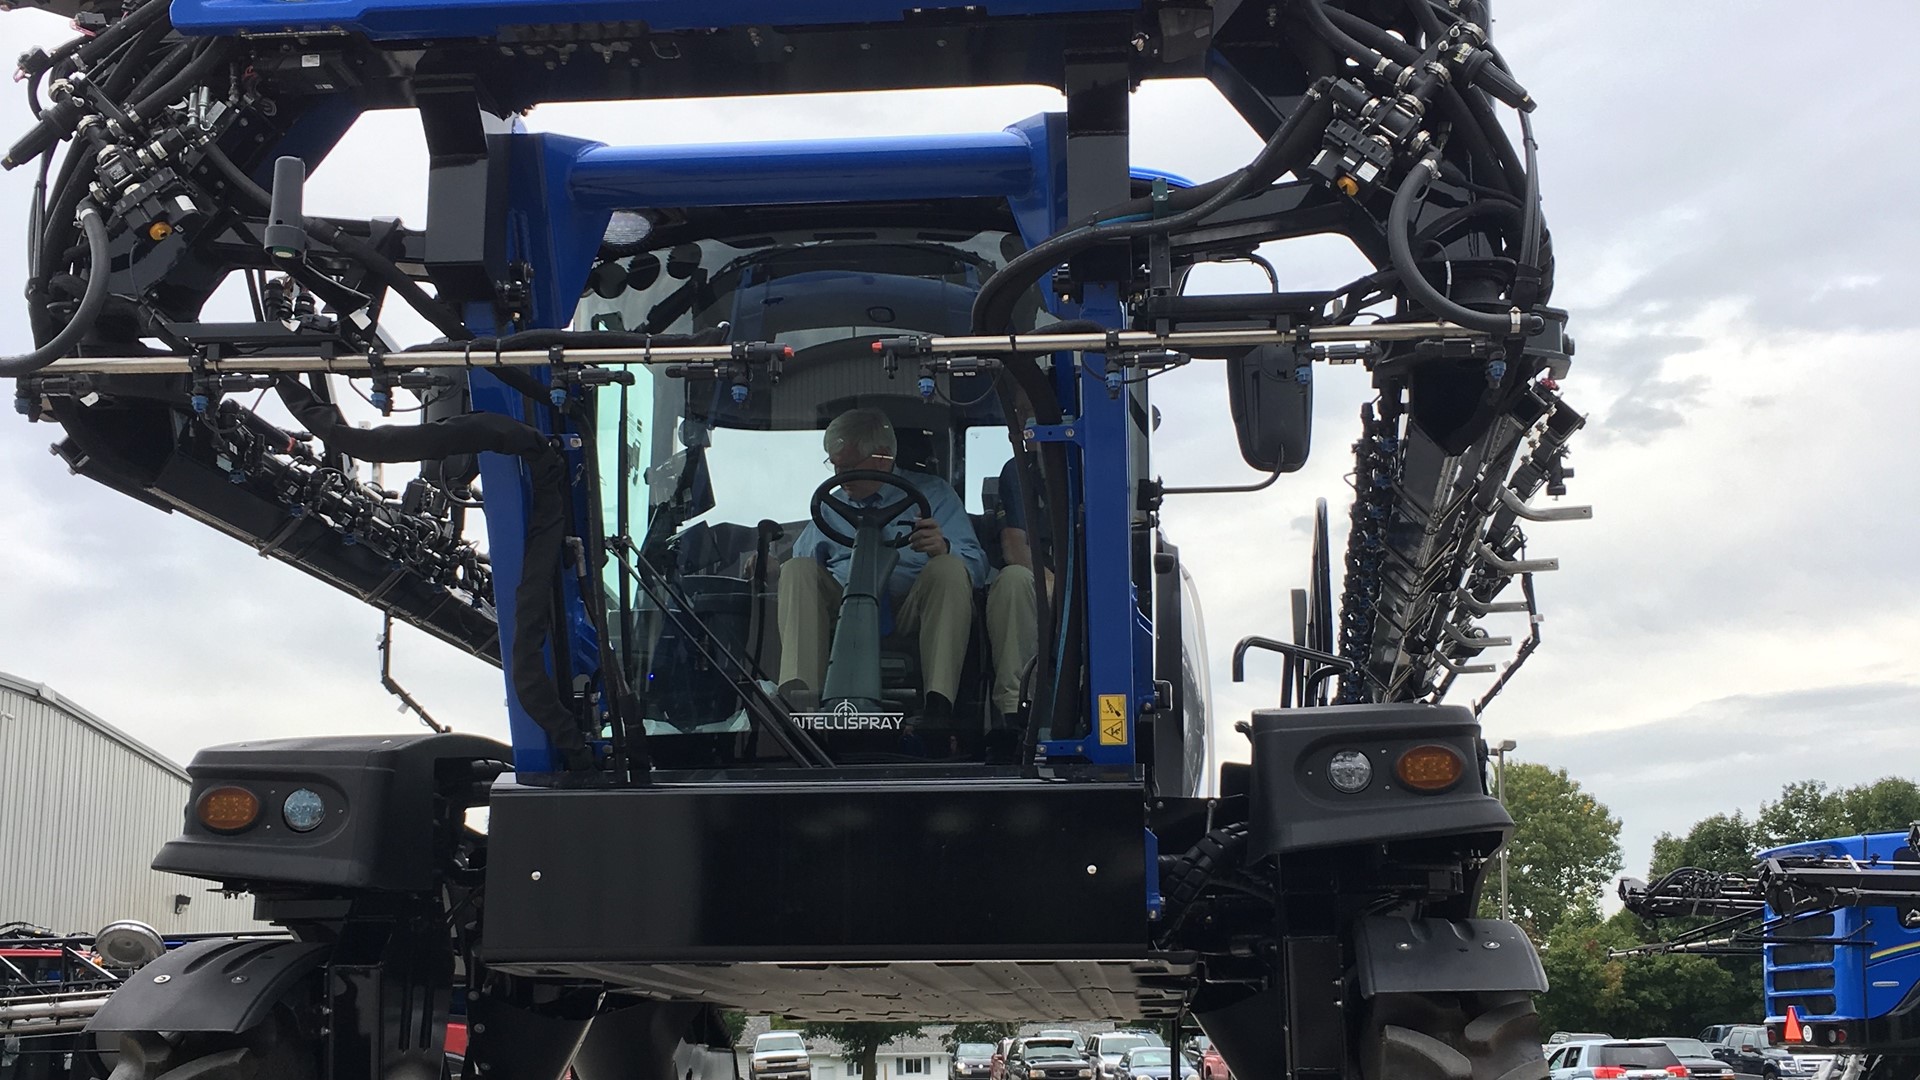 U.S. Representative Glenn Grothman sits in cab of a crop sprayer at CNH Industrial's New Holland Agriculture plant